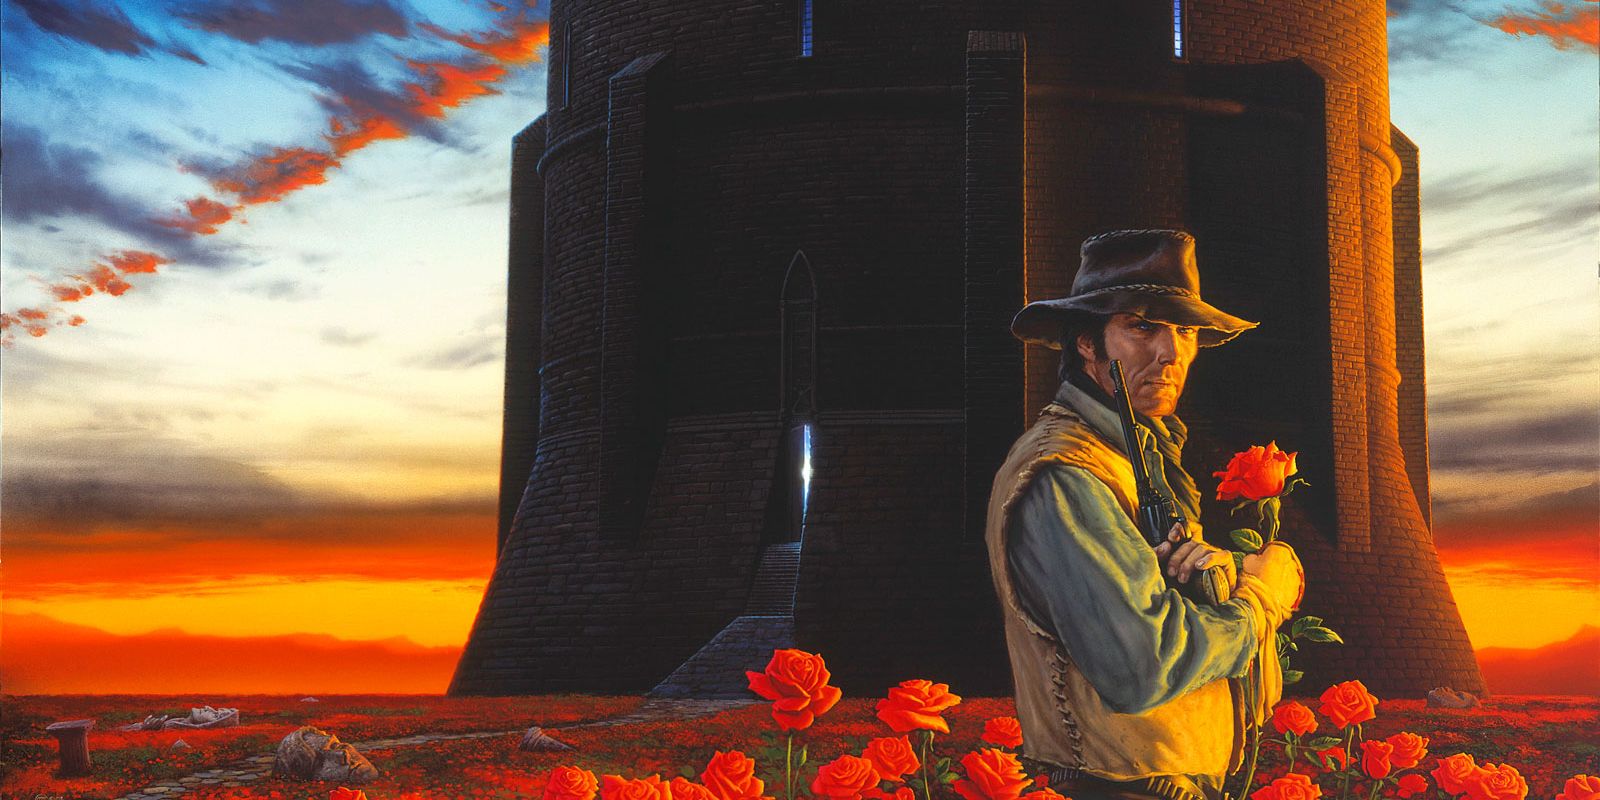 The Dark Tower cover art for book 7.